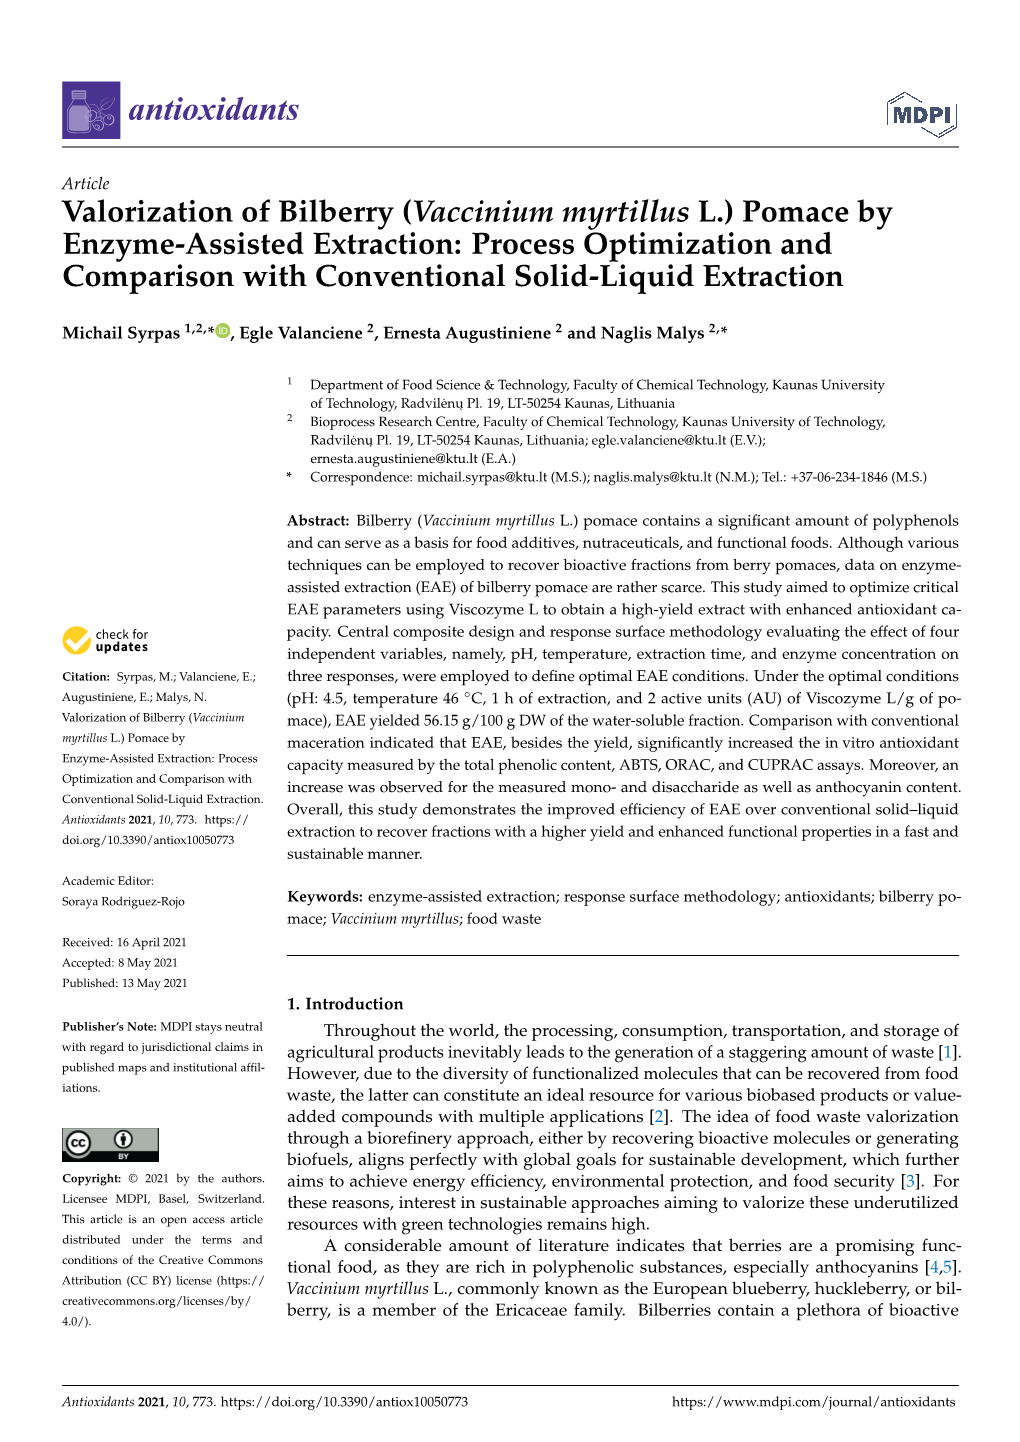 (Vaccinium Myrtillus L.) Pomace by Enzyme-Assisted Extraction: Process Optimization and Comparison with Conventional Solid-Liquid Extraction